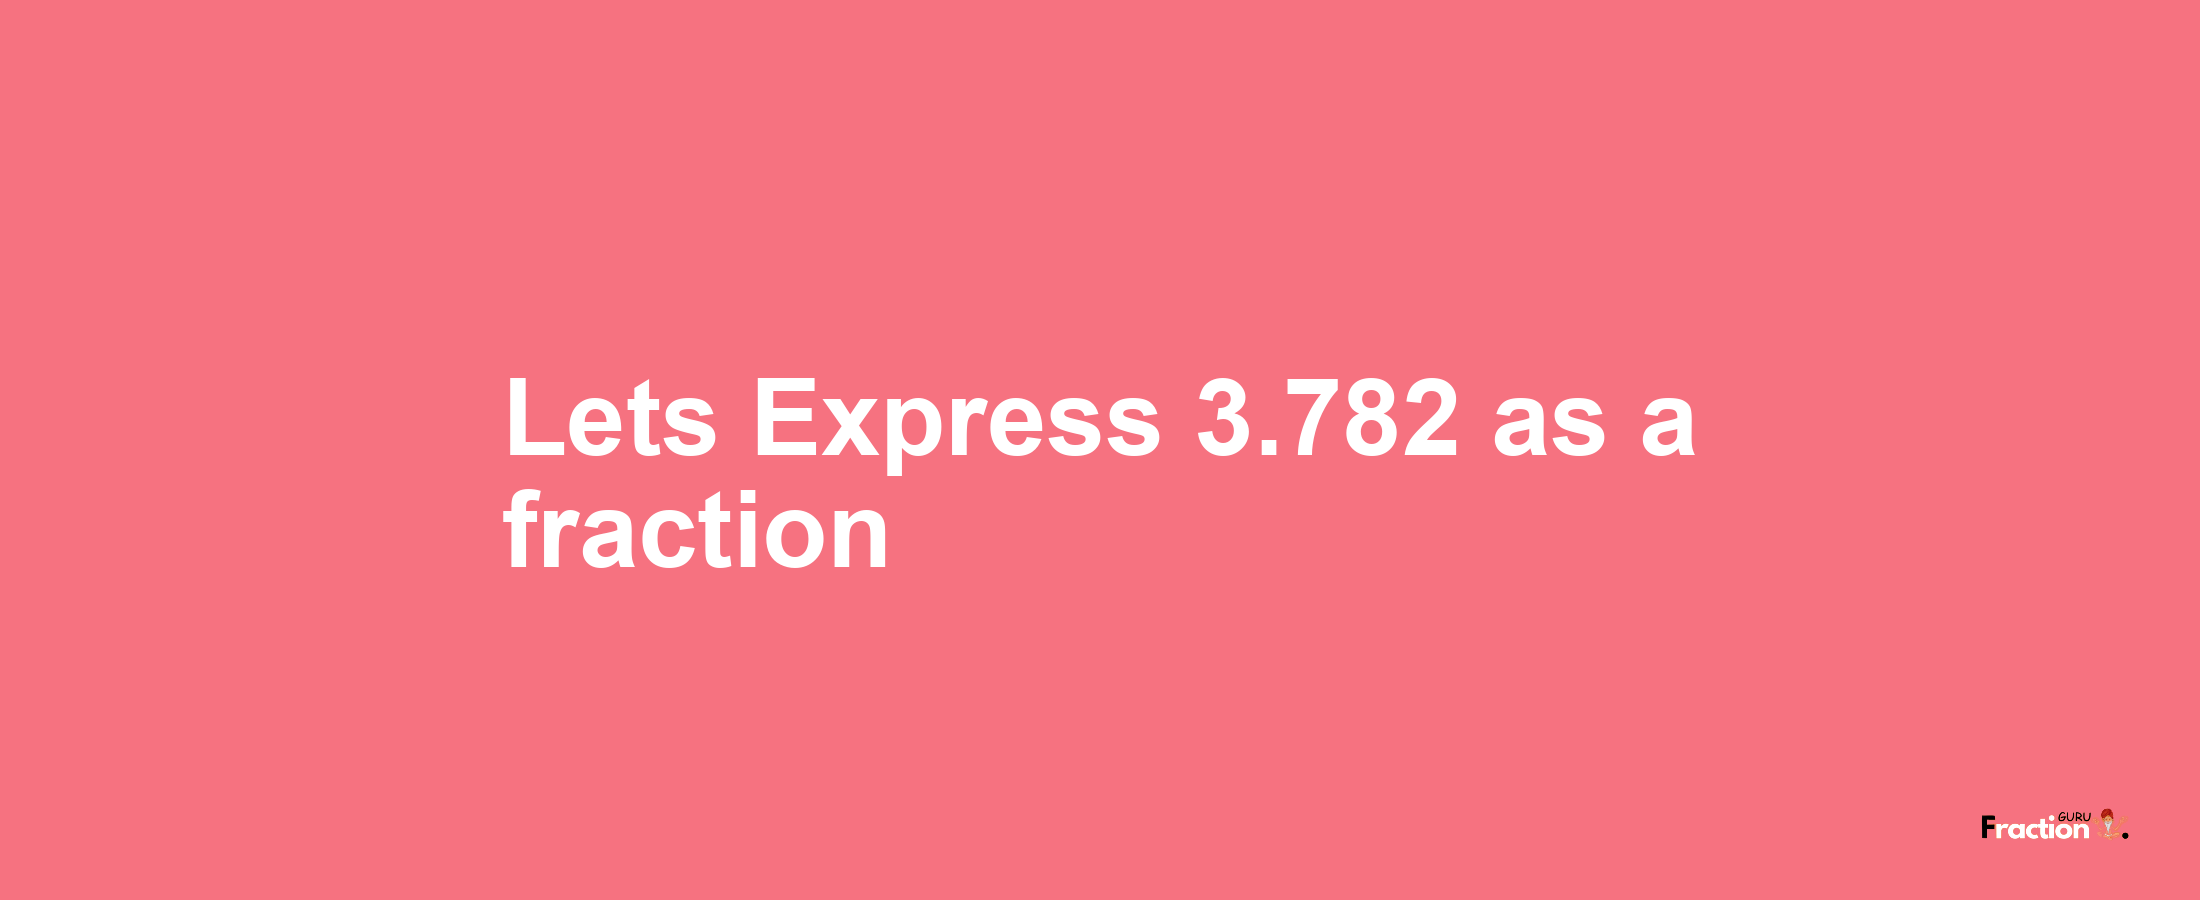 Lets Express 3.782 as afraction